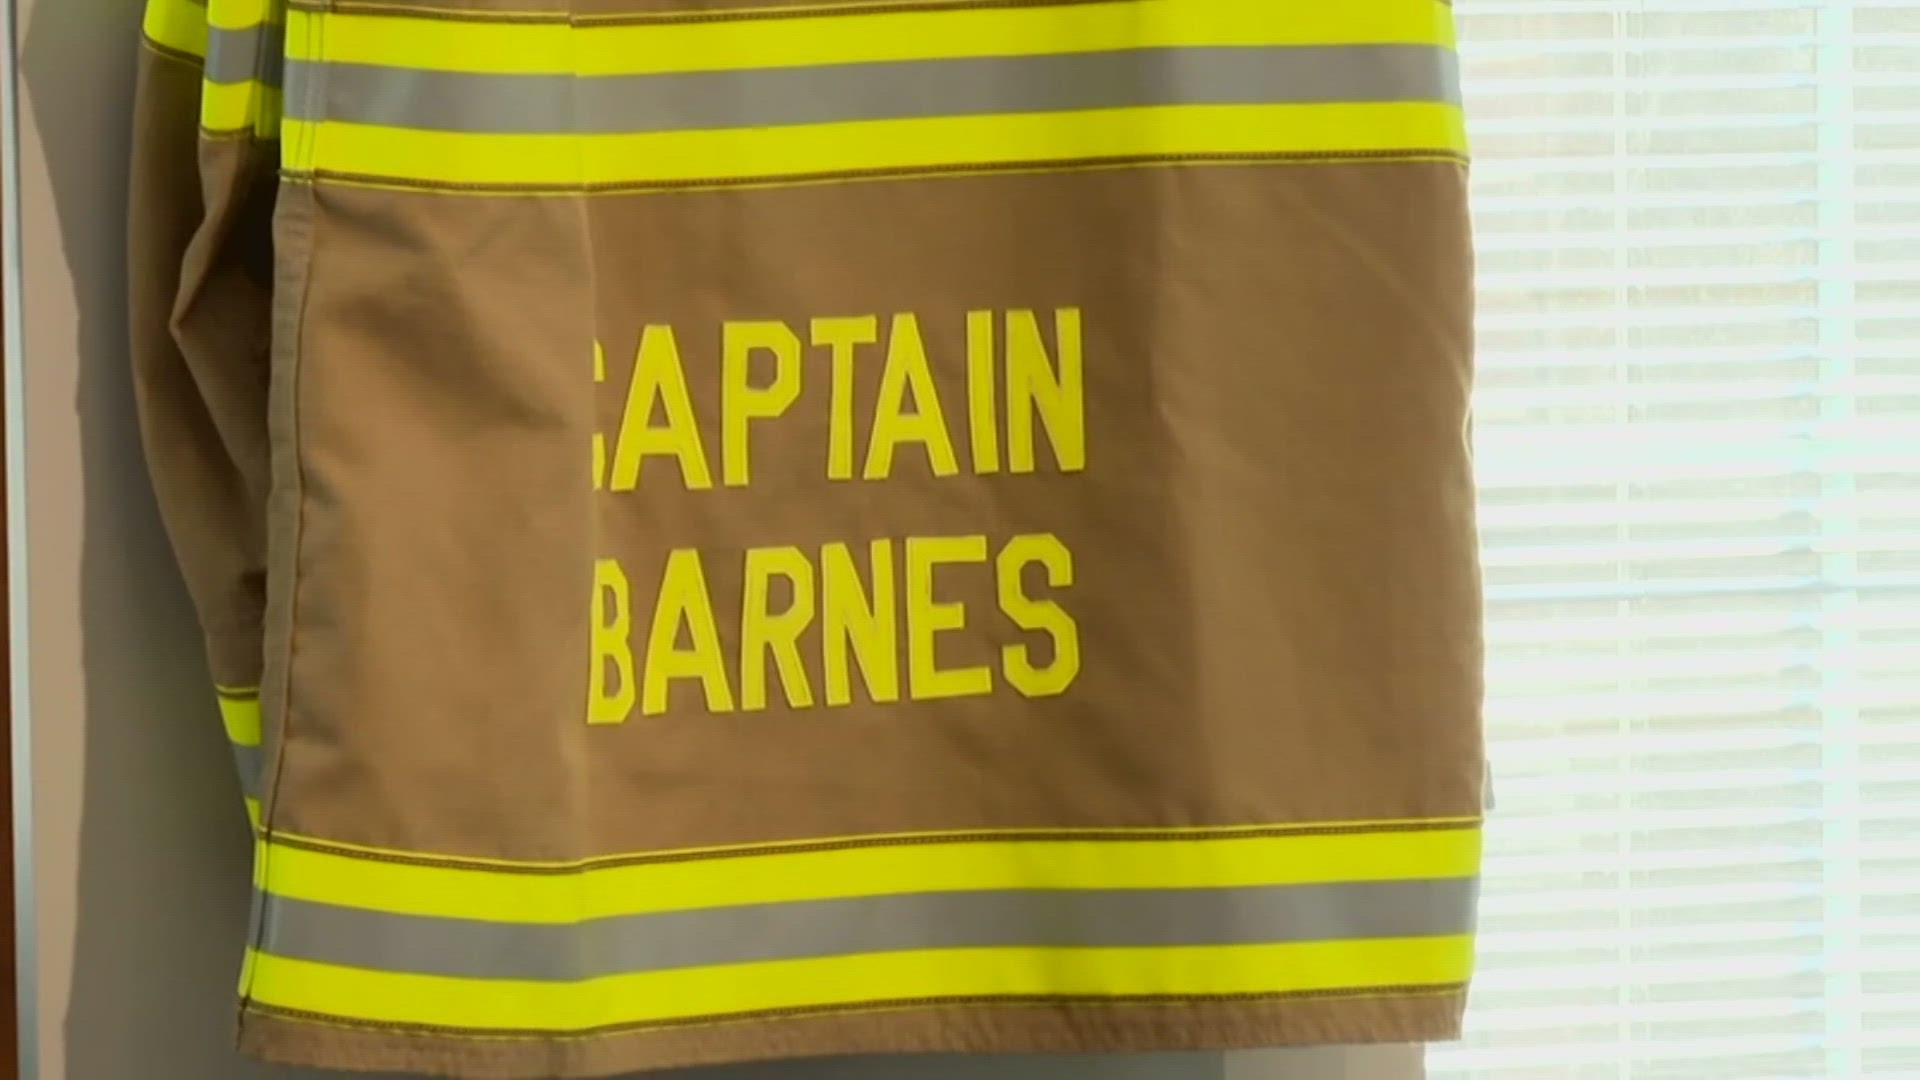 It has been five years since the death of Capt. Joel Barnes, but first responders say they feel as though he's present with them every day.